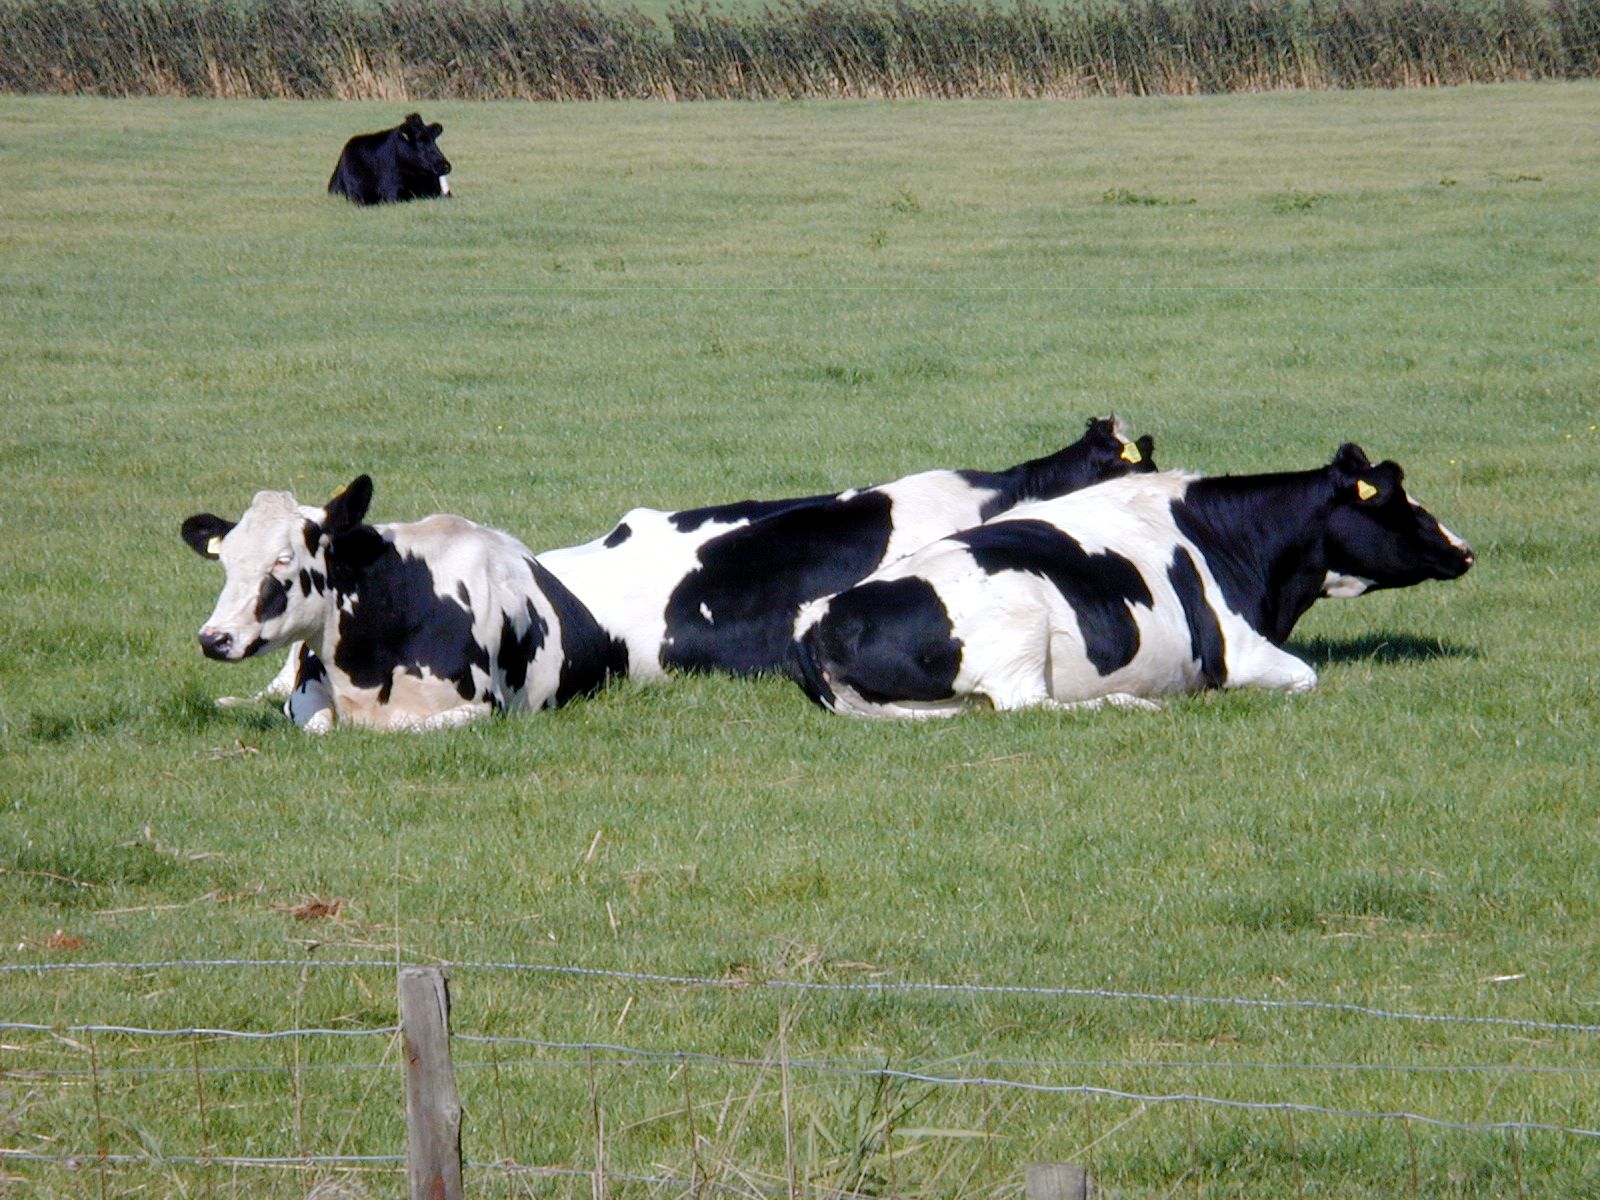 cows field black white grass fence group